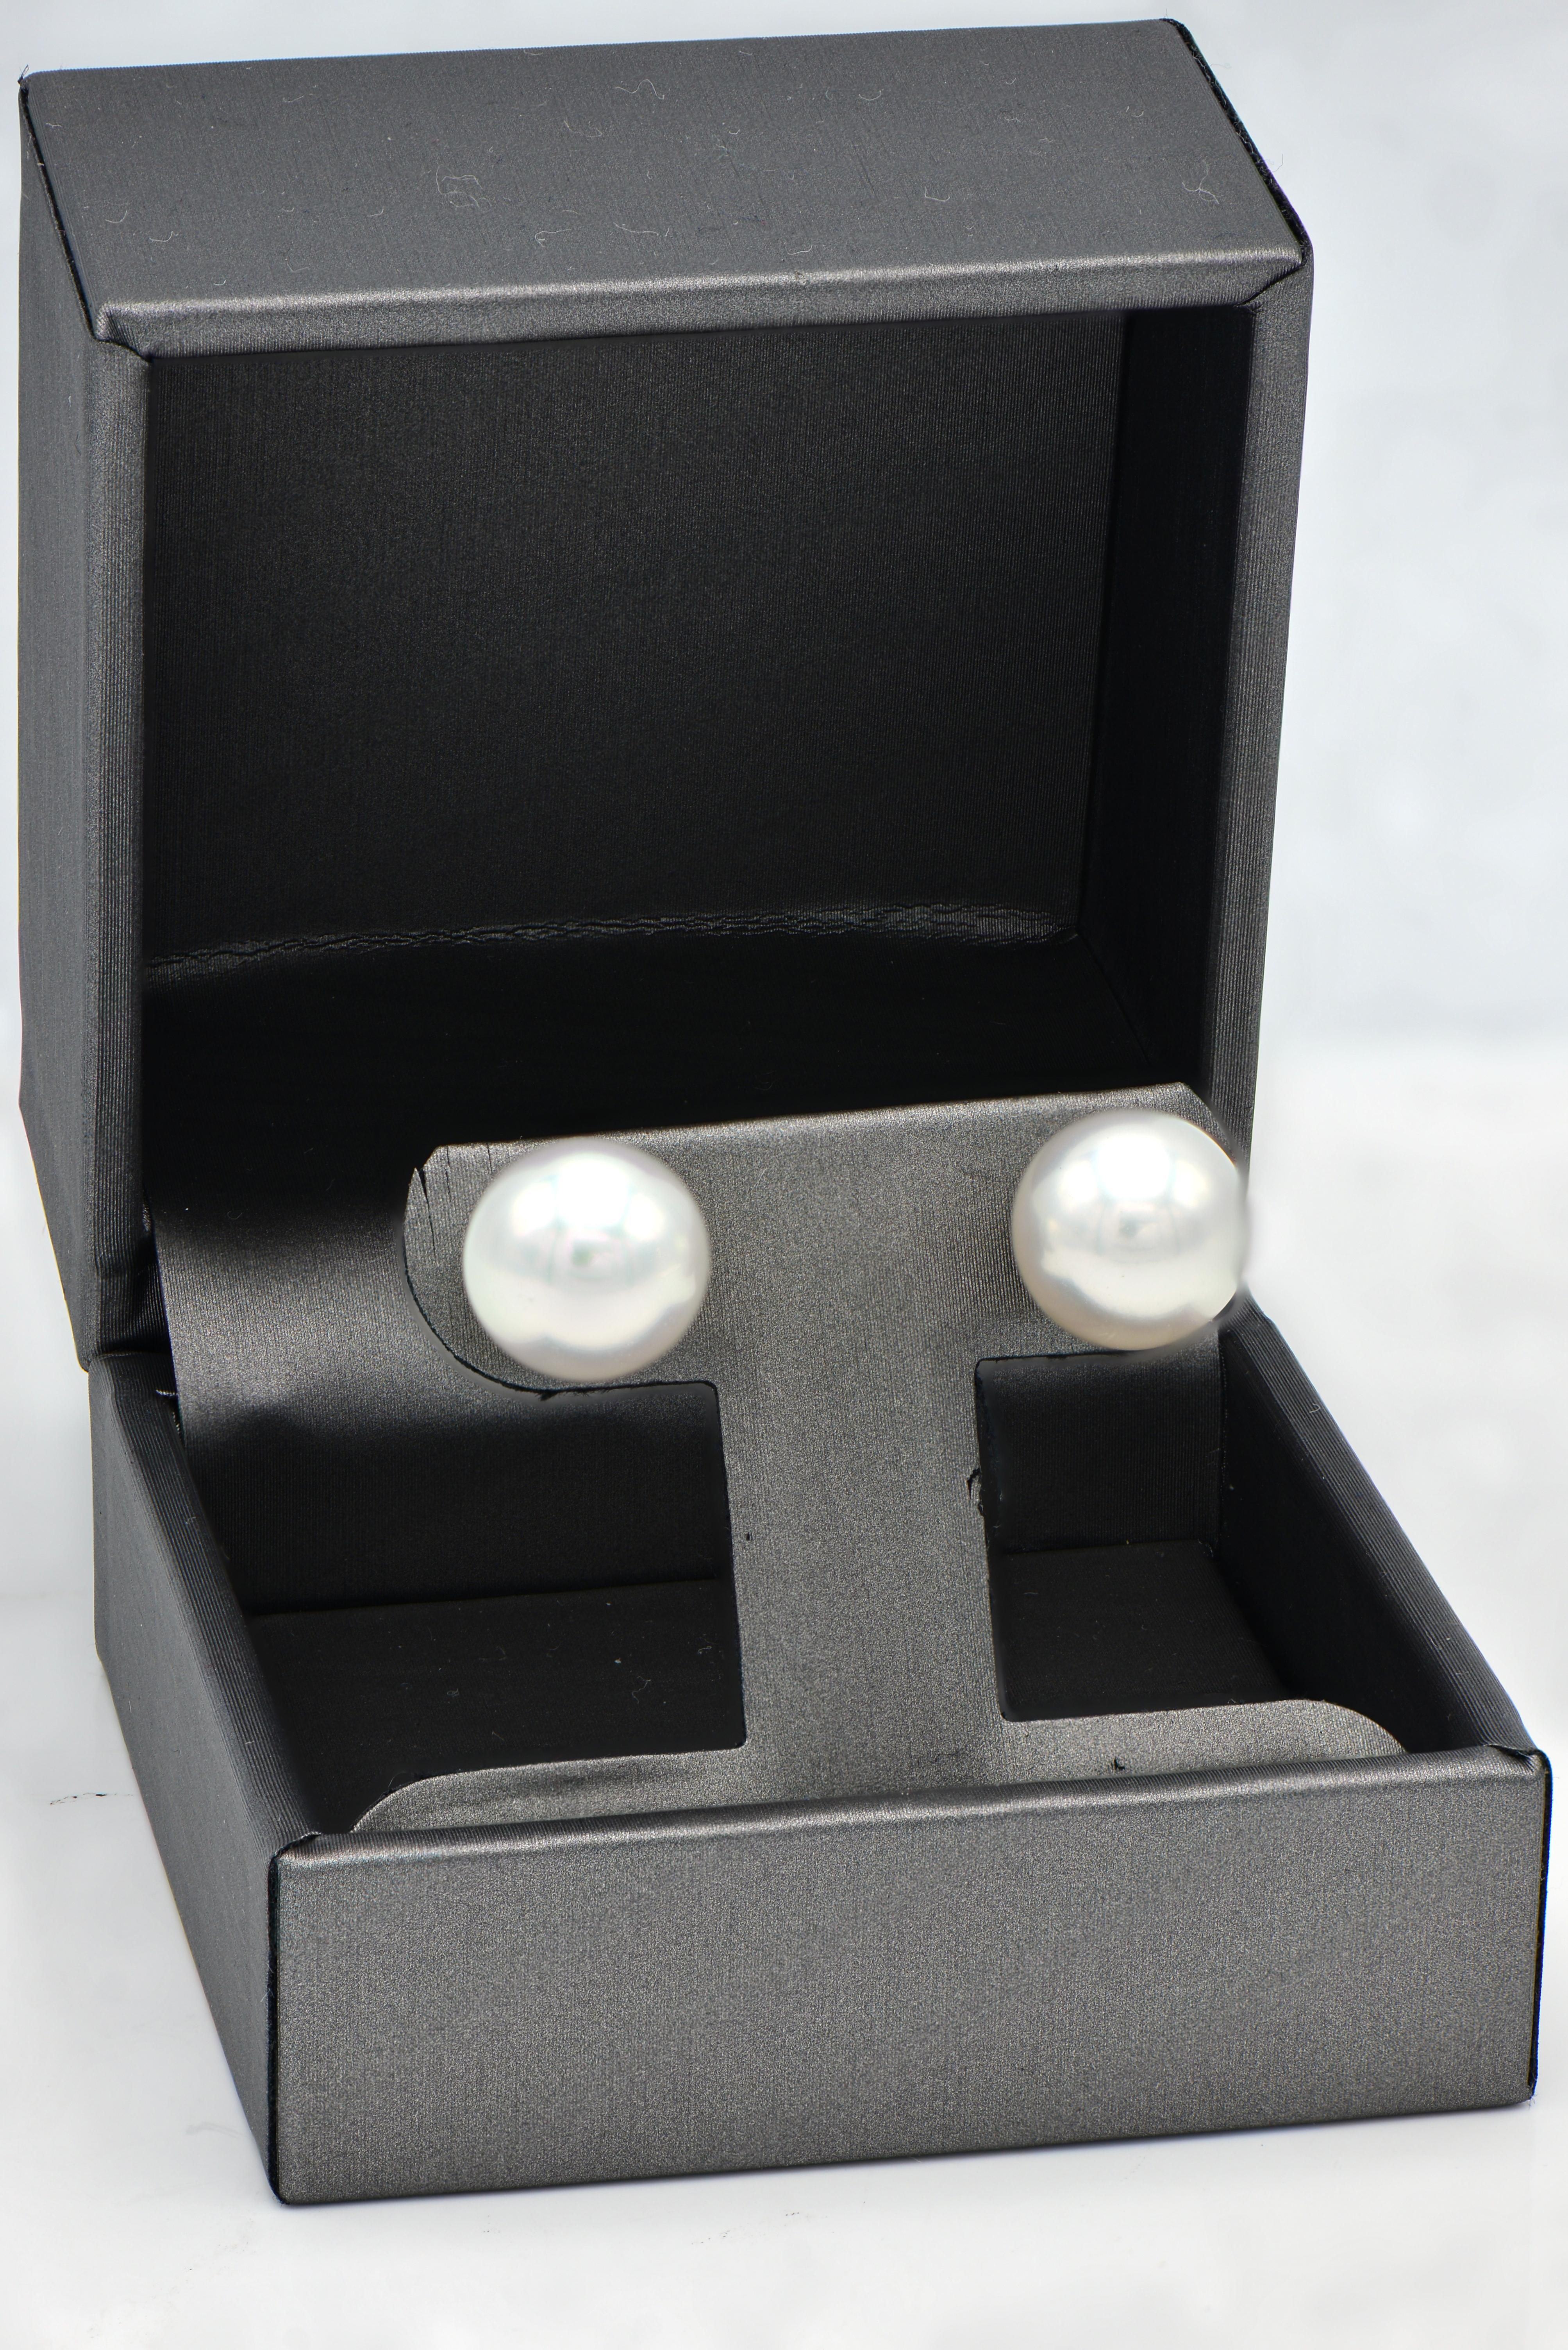 South Sea Pearl Stud Earrings are a classic and timeless piece of jewelry that should be owned by everyone. South Sea studs are slightly larger than cultured pearl studs for a bigger more sophisticated look. These 12.5-13mm South Sea Pearl Studs are